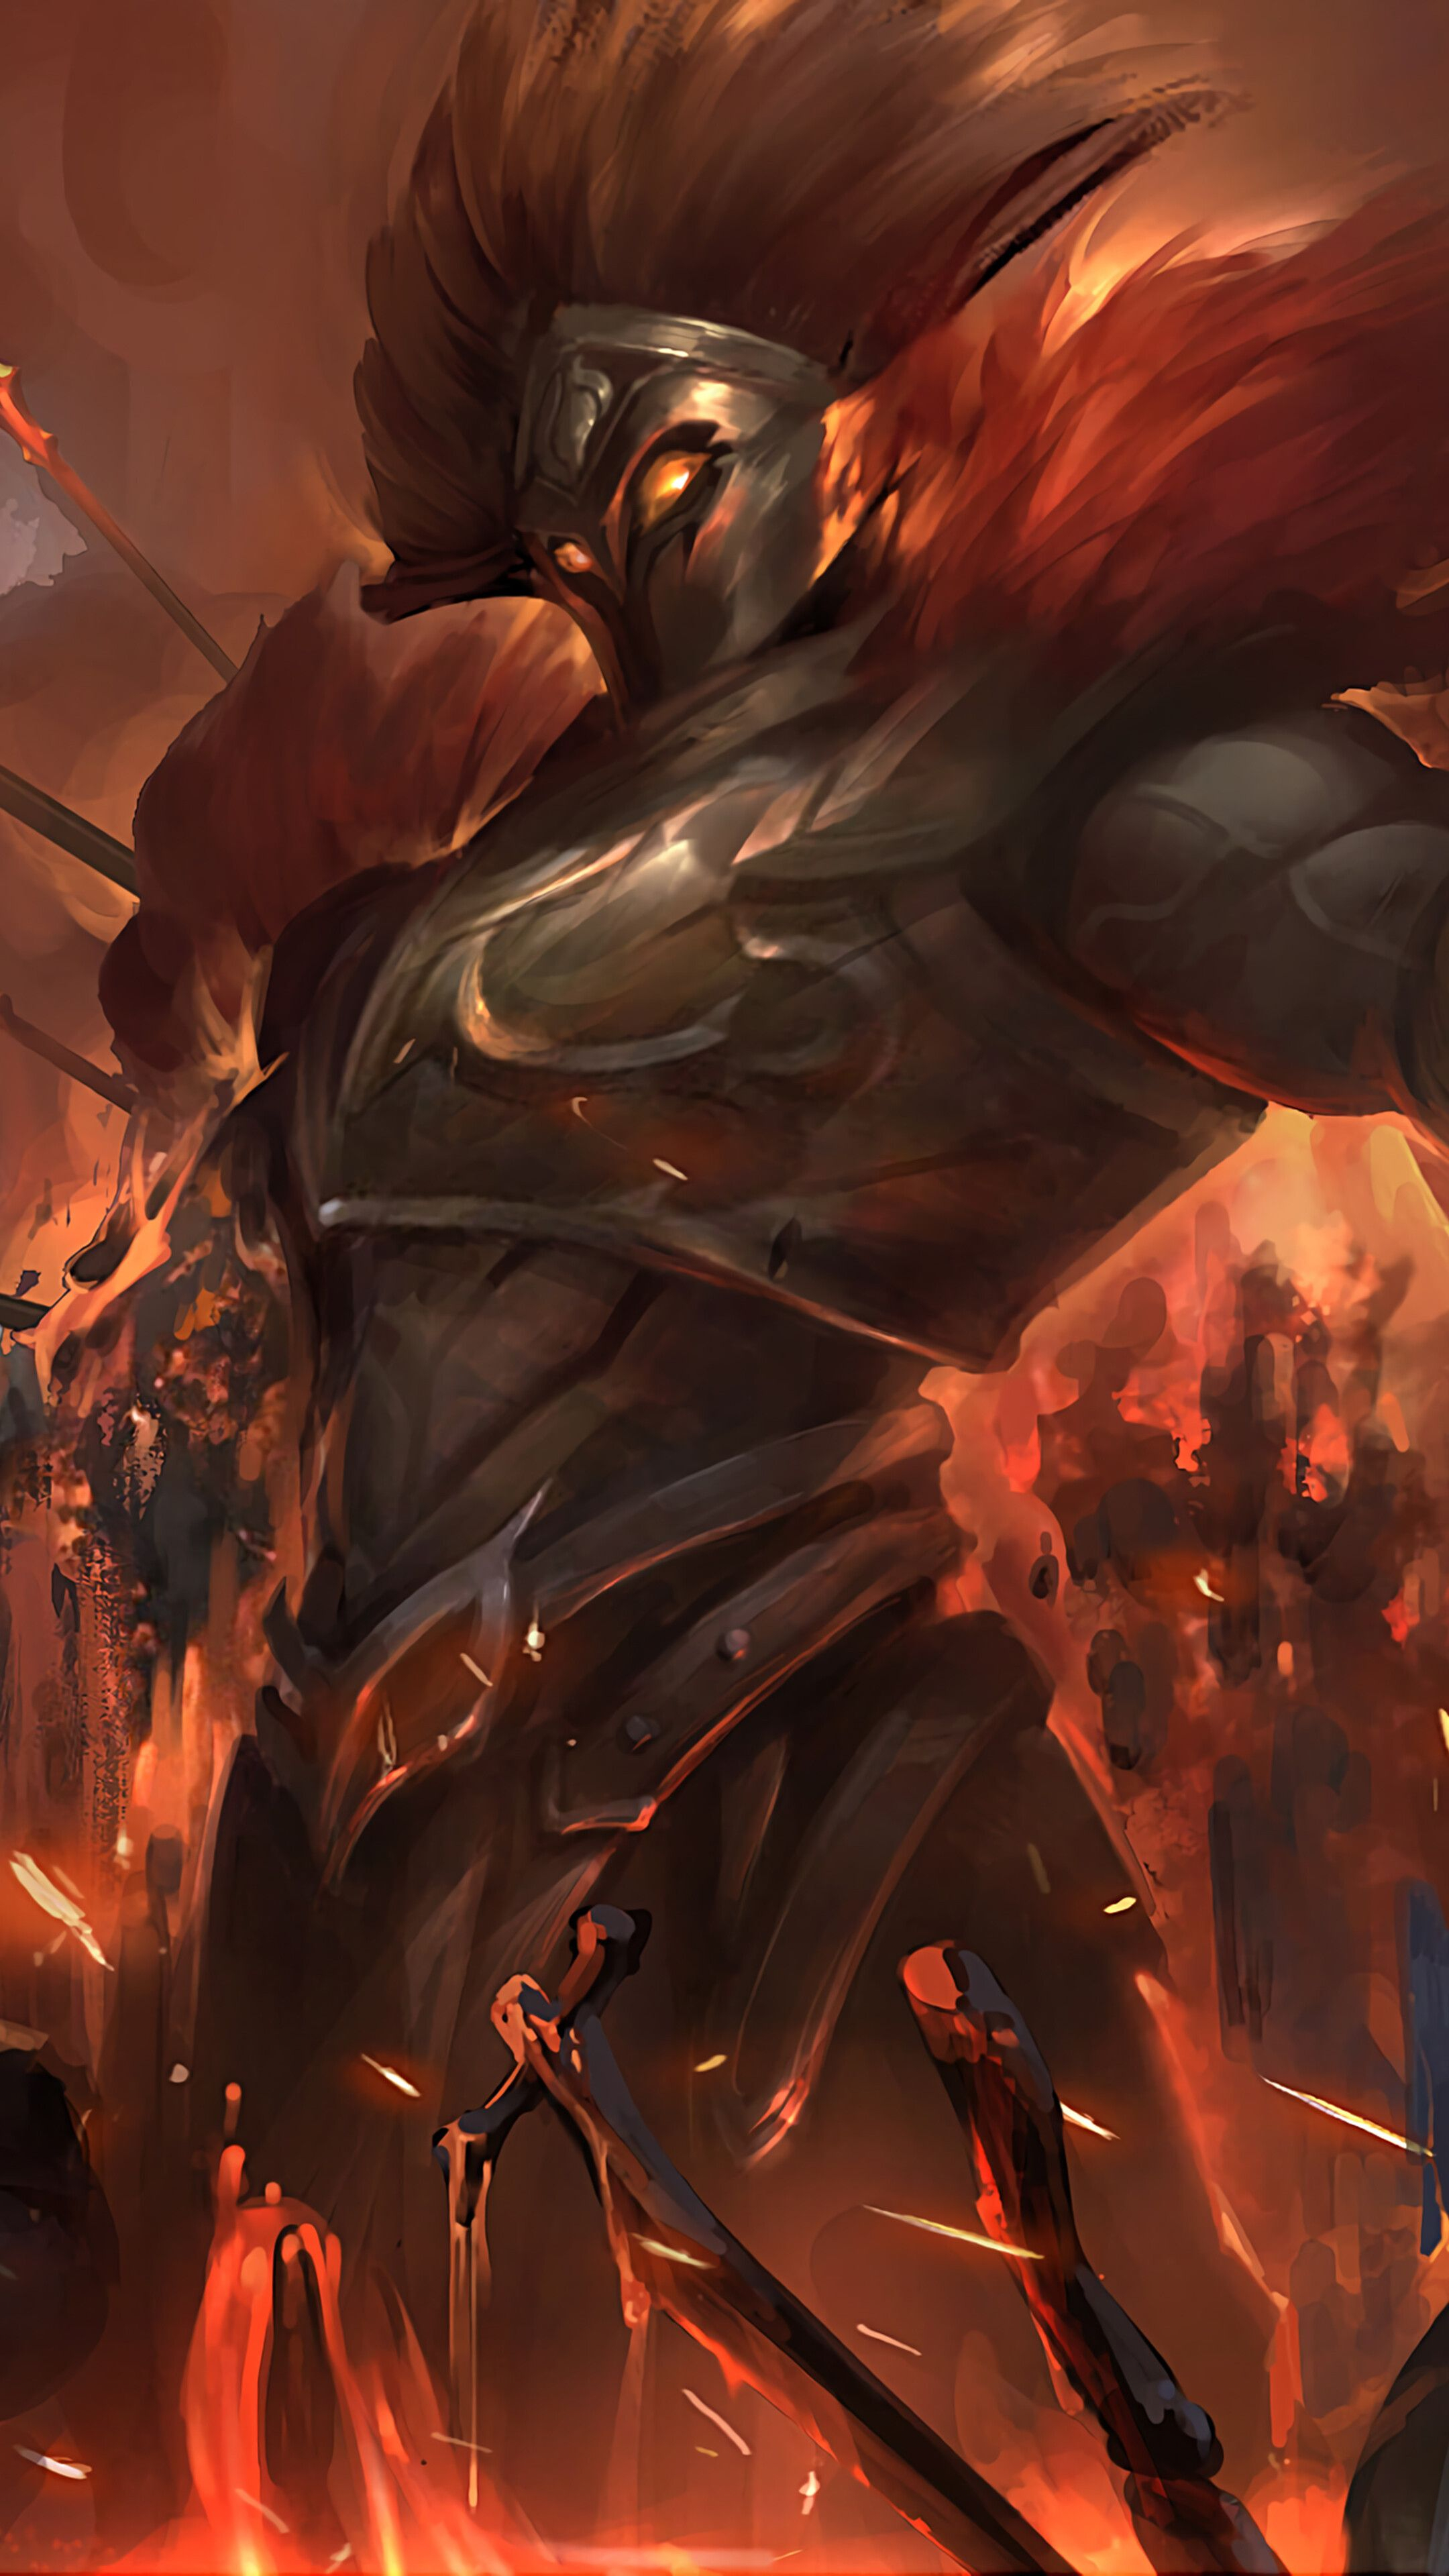 2160x3840 Pin by Yox on League of wallpaper | Pantheon league of legends, Champions league of legends, League of legends characters